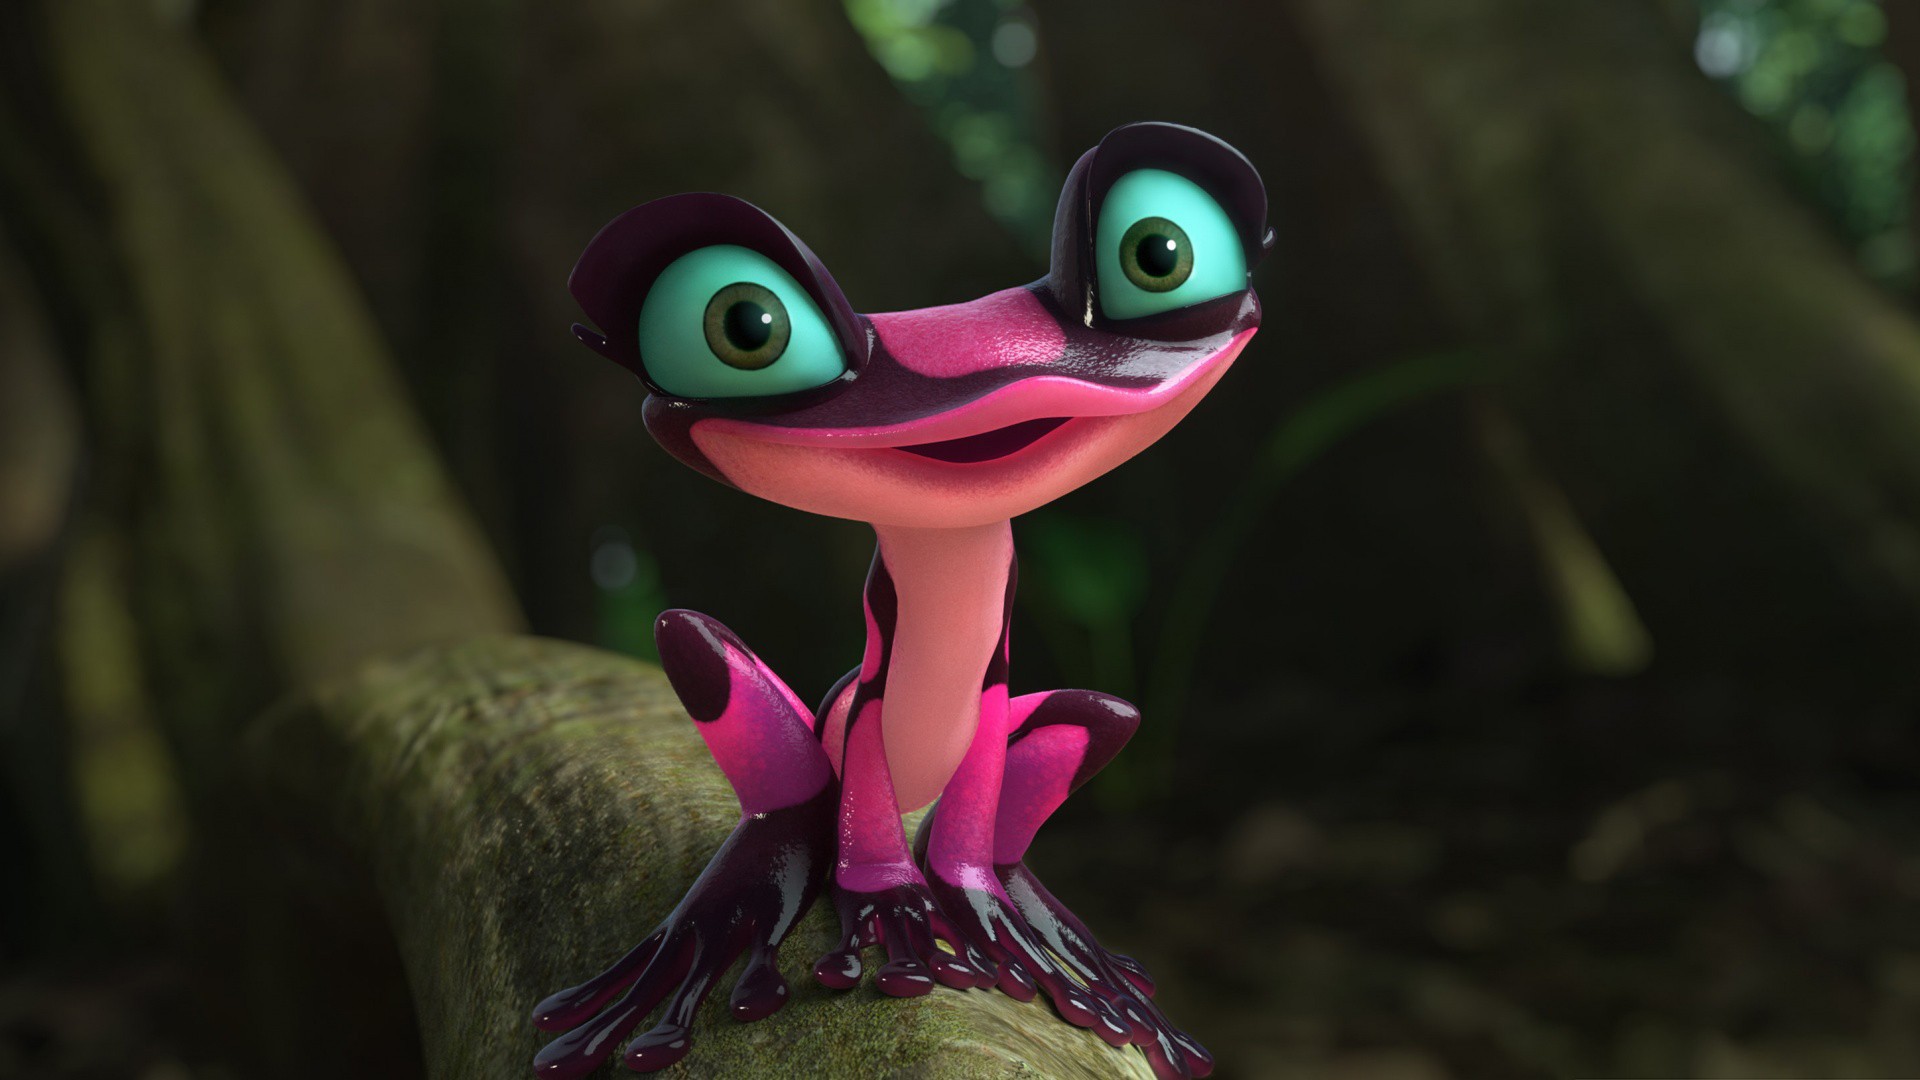 Cute frog cartoon wallpapers and images   wallpapers